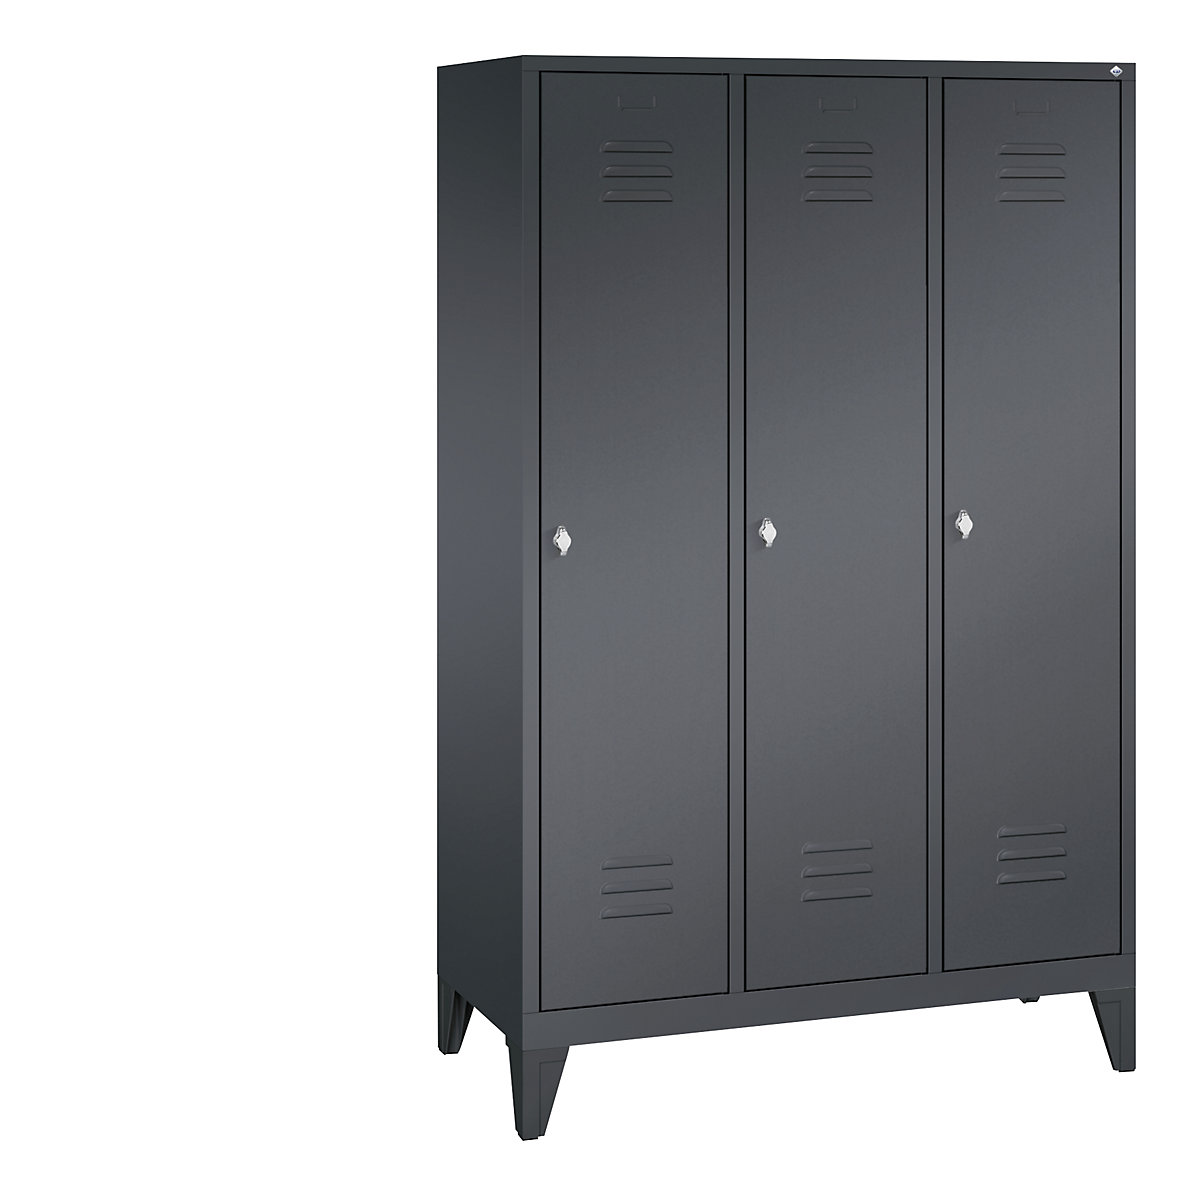 CLASSIC cloakroom locker with feet – C+P, 3 compartments, compartment width 400 mm, black grey-8